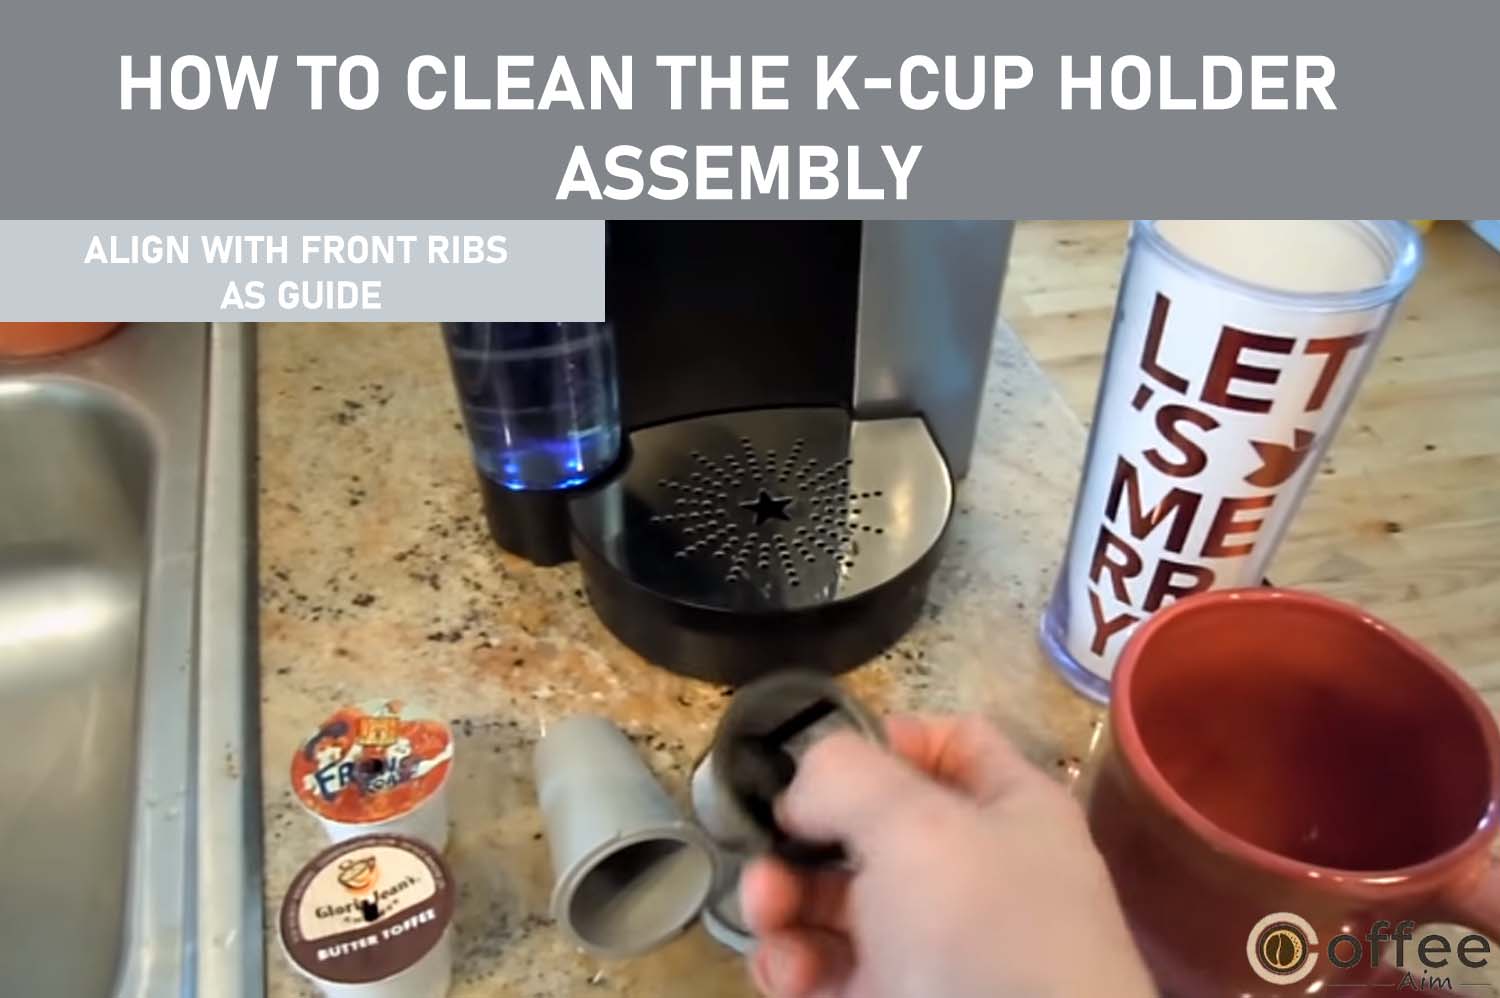 Align the cleaned K-Cup Holder with the opening, using the two front ribs as a guide, to ensure proper placement.